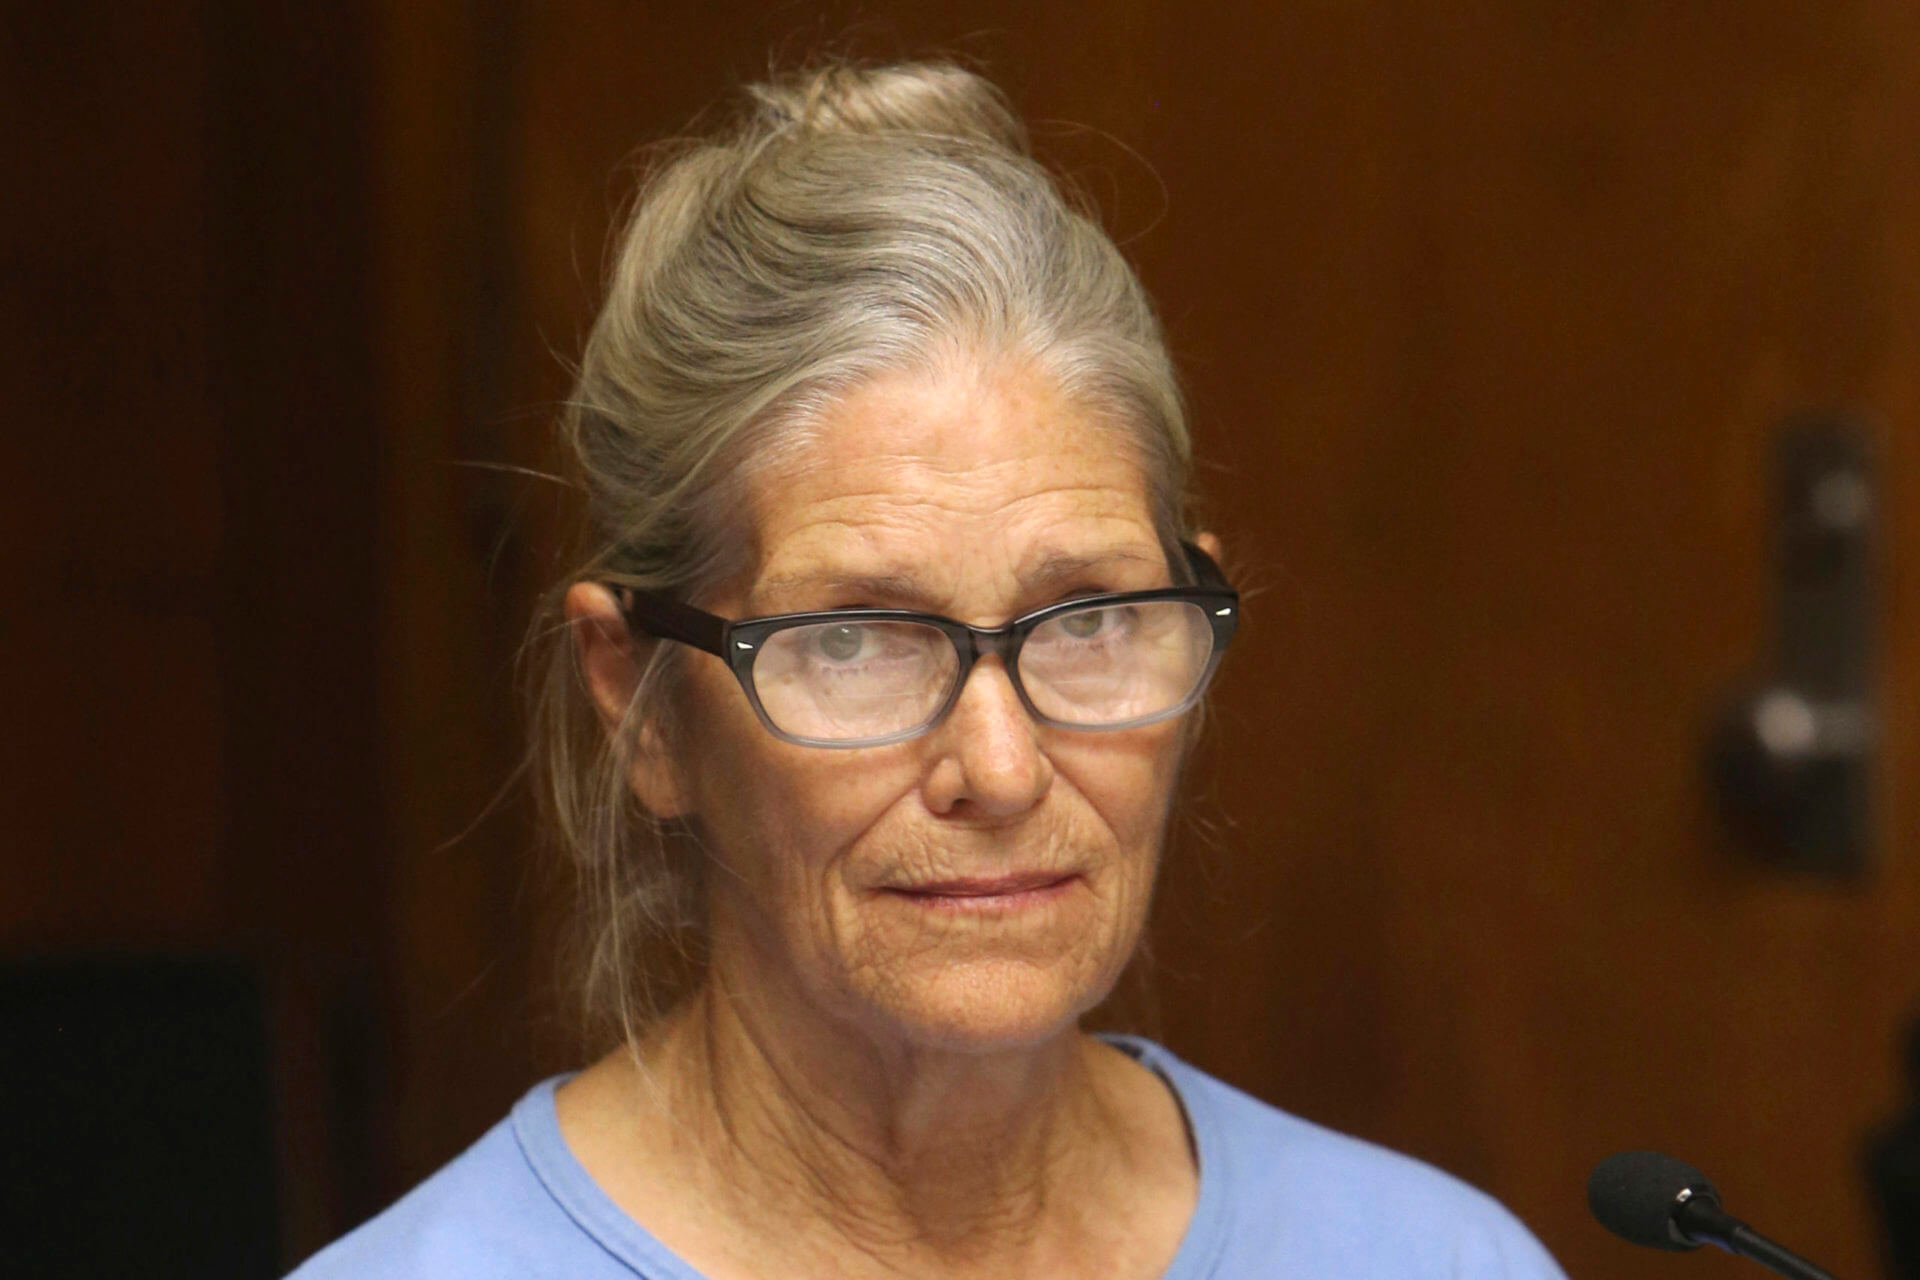 Leslie Van Houston, wearing glasses and a blue shirt, looks at the camera